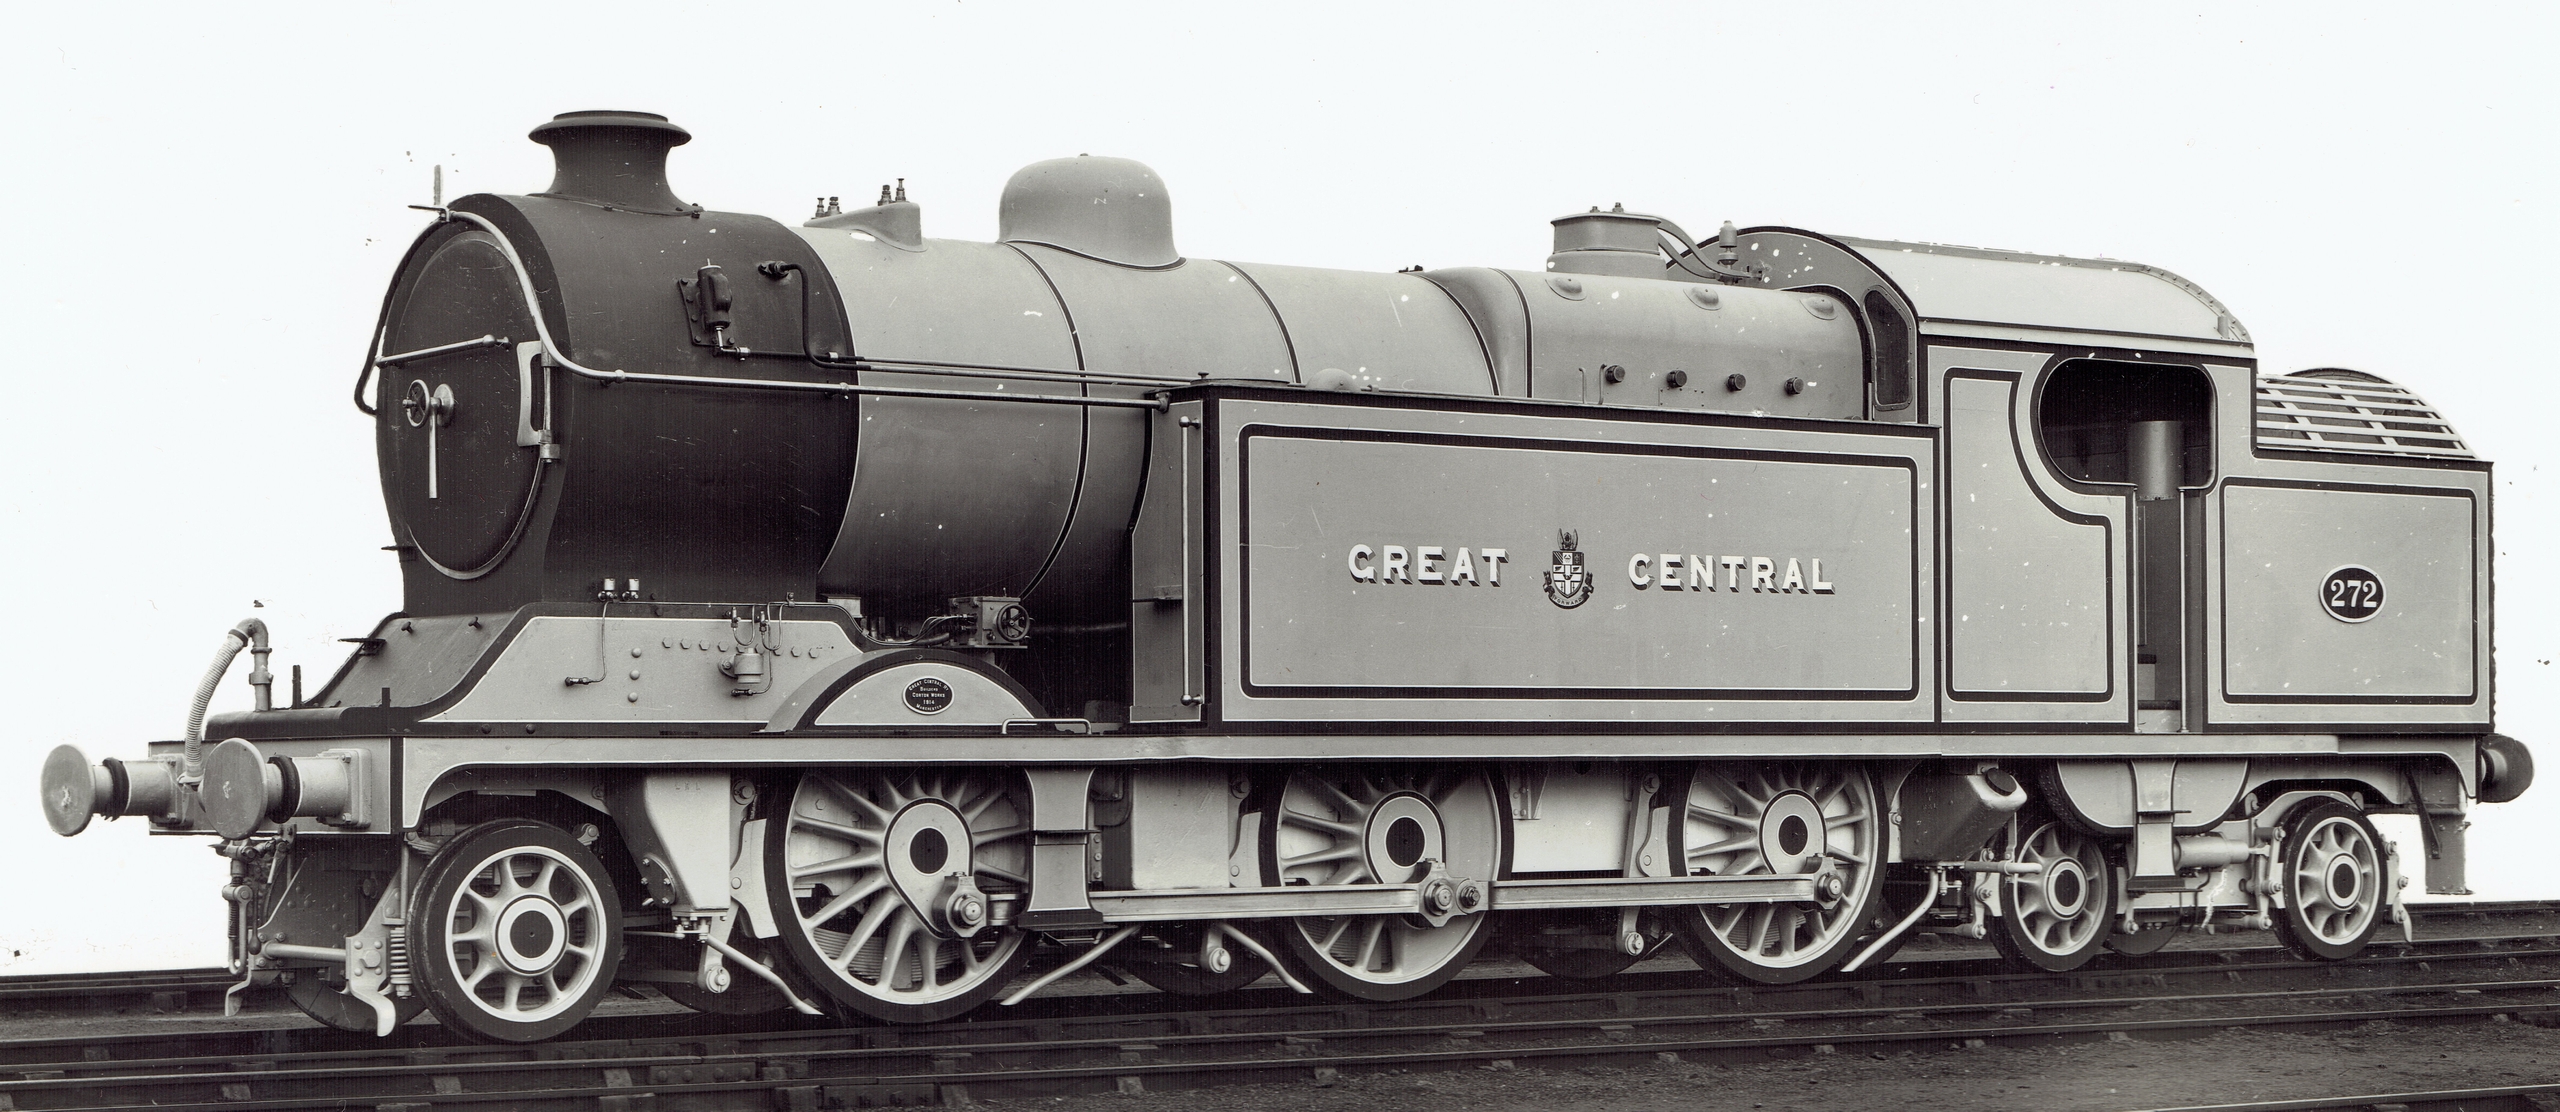 No. 9052 in September 1947 at Northwich Depot